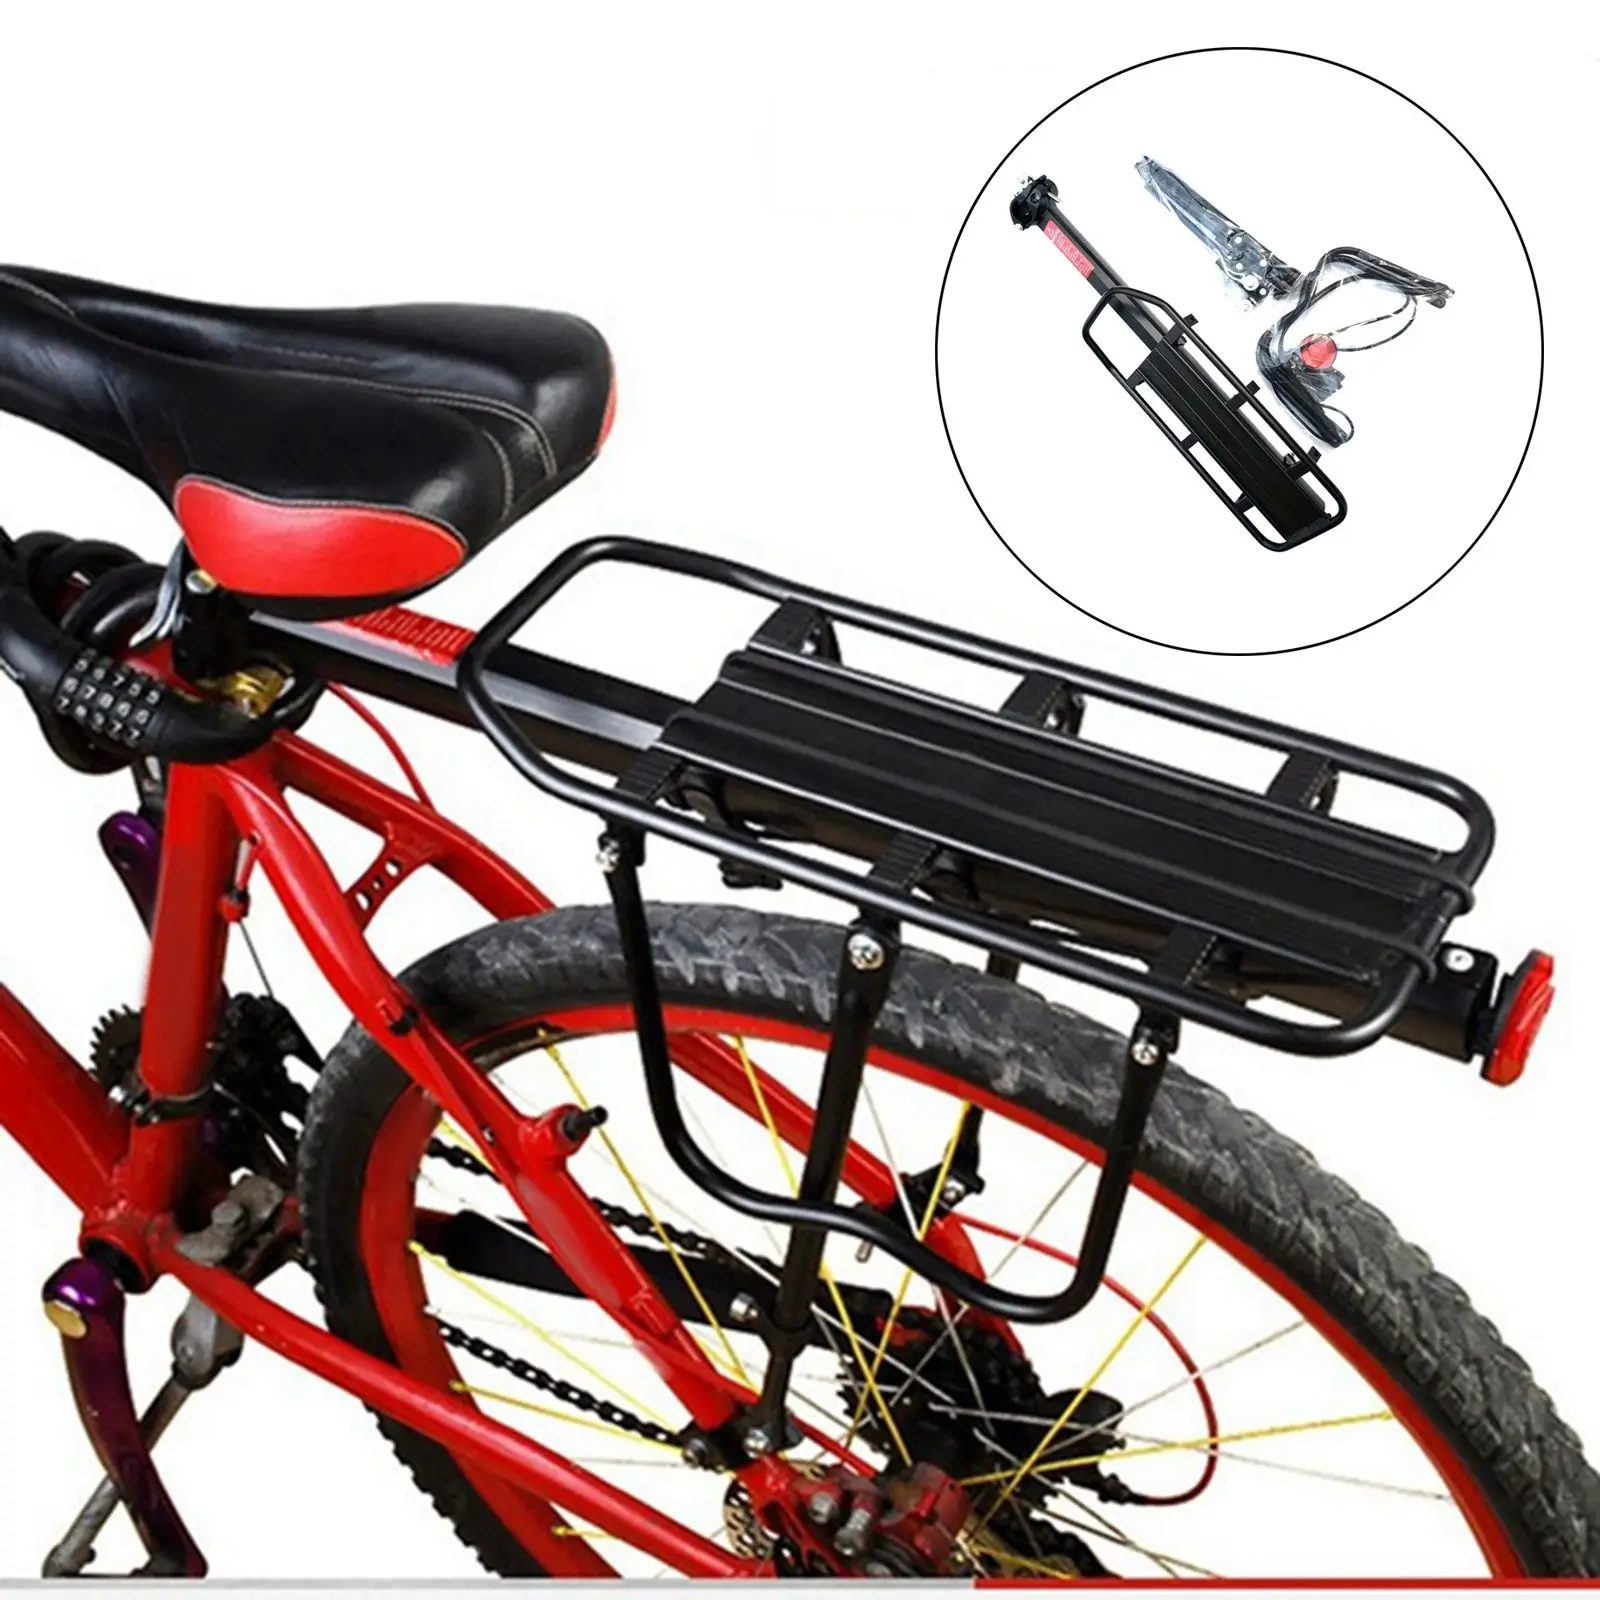 24-29 inch Bicycle Carrier Bike Luggage Cargo Rear Rack Aluminum Alloy Shelf Holder Stand Support Easy to Install